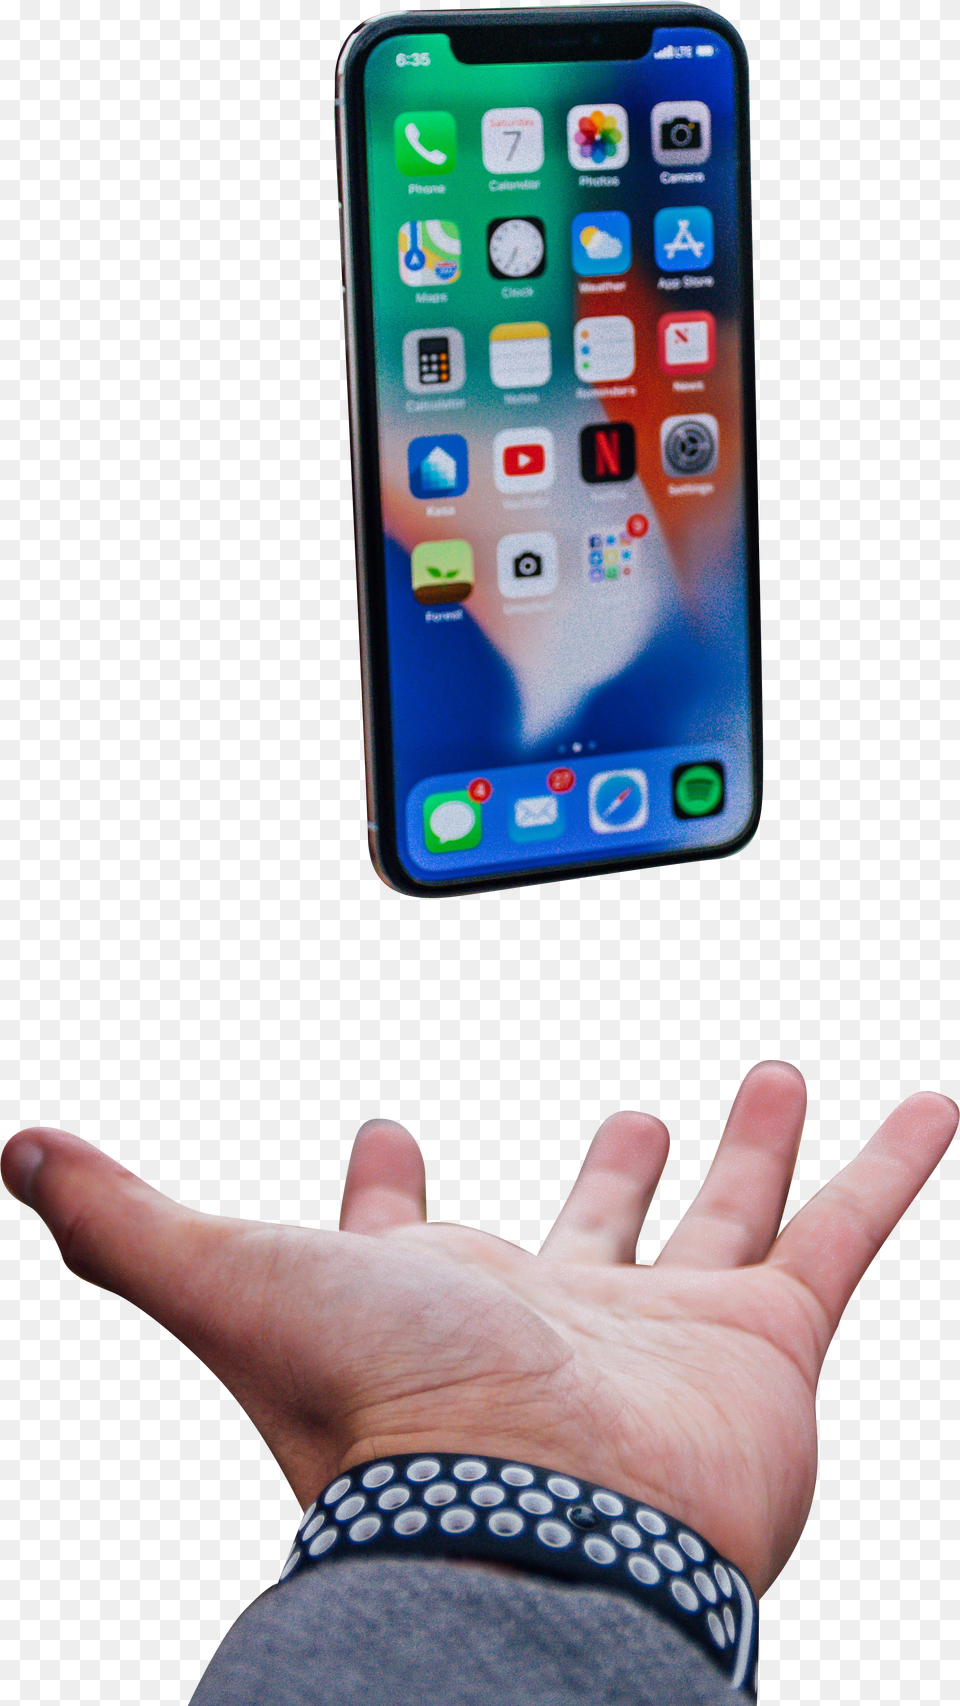 Iphone X Floating Over Palm Transparent Background Phone Floating Over A Hand Free Png Download